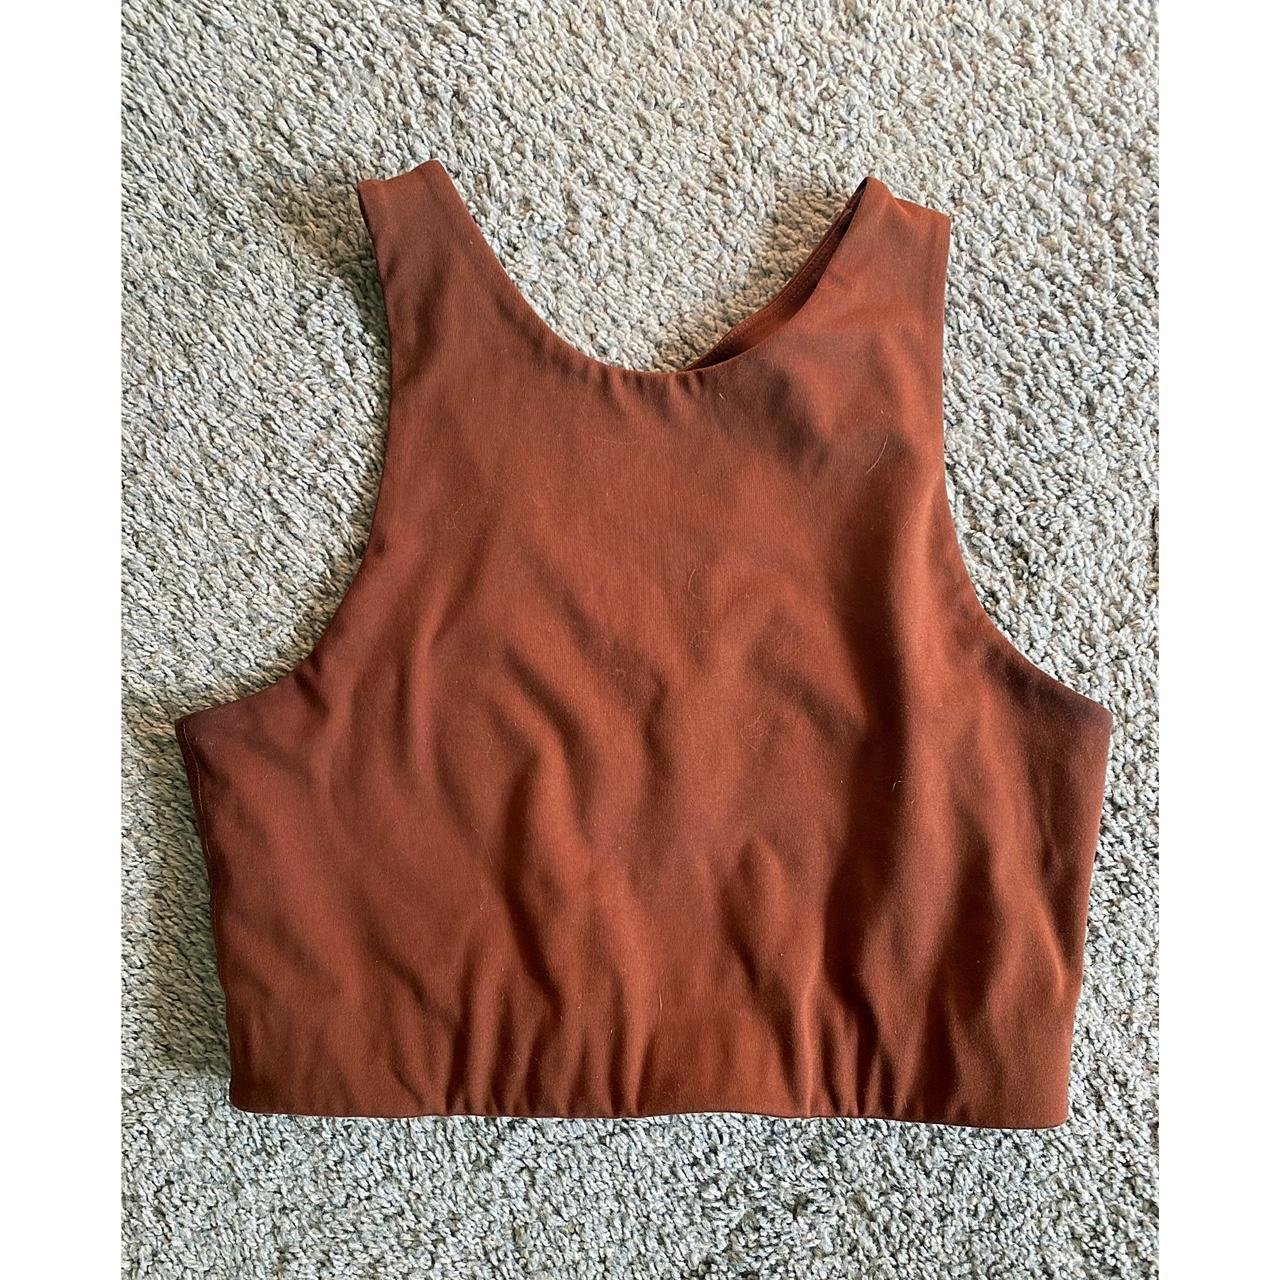 Girlfriend Collective Dylan tank in brown. I LOVE - Depop